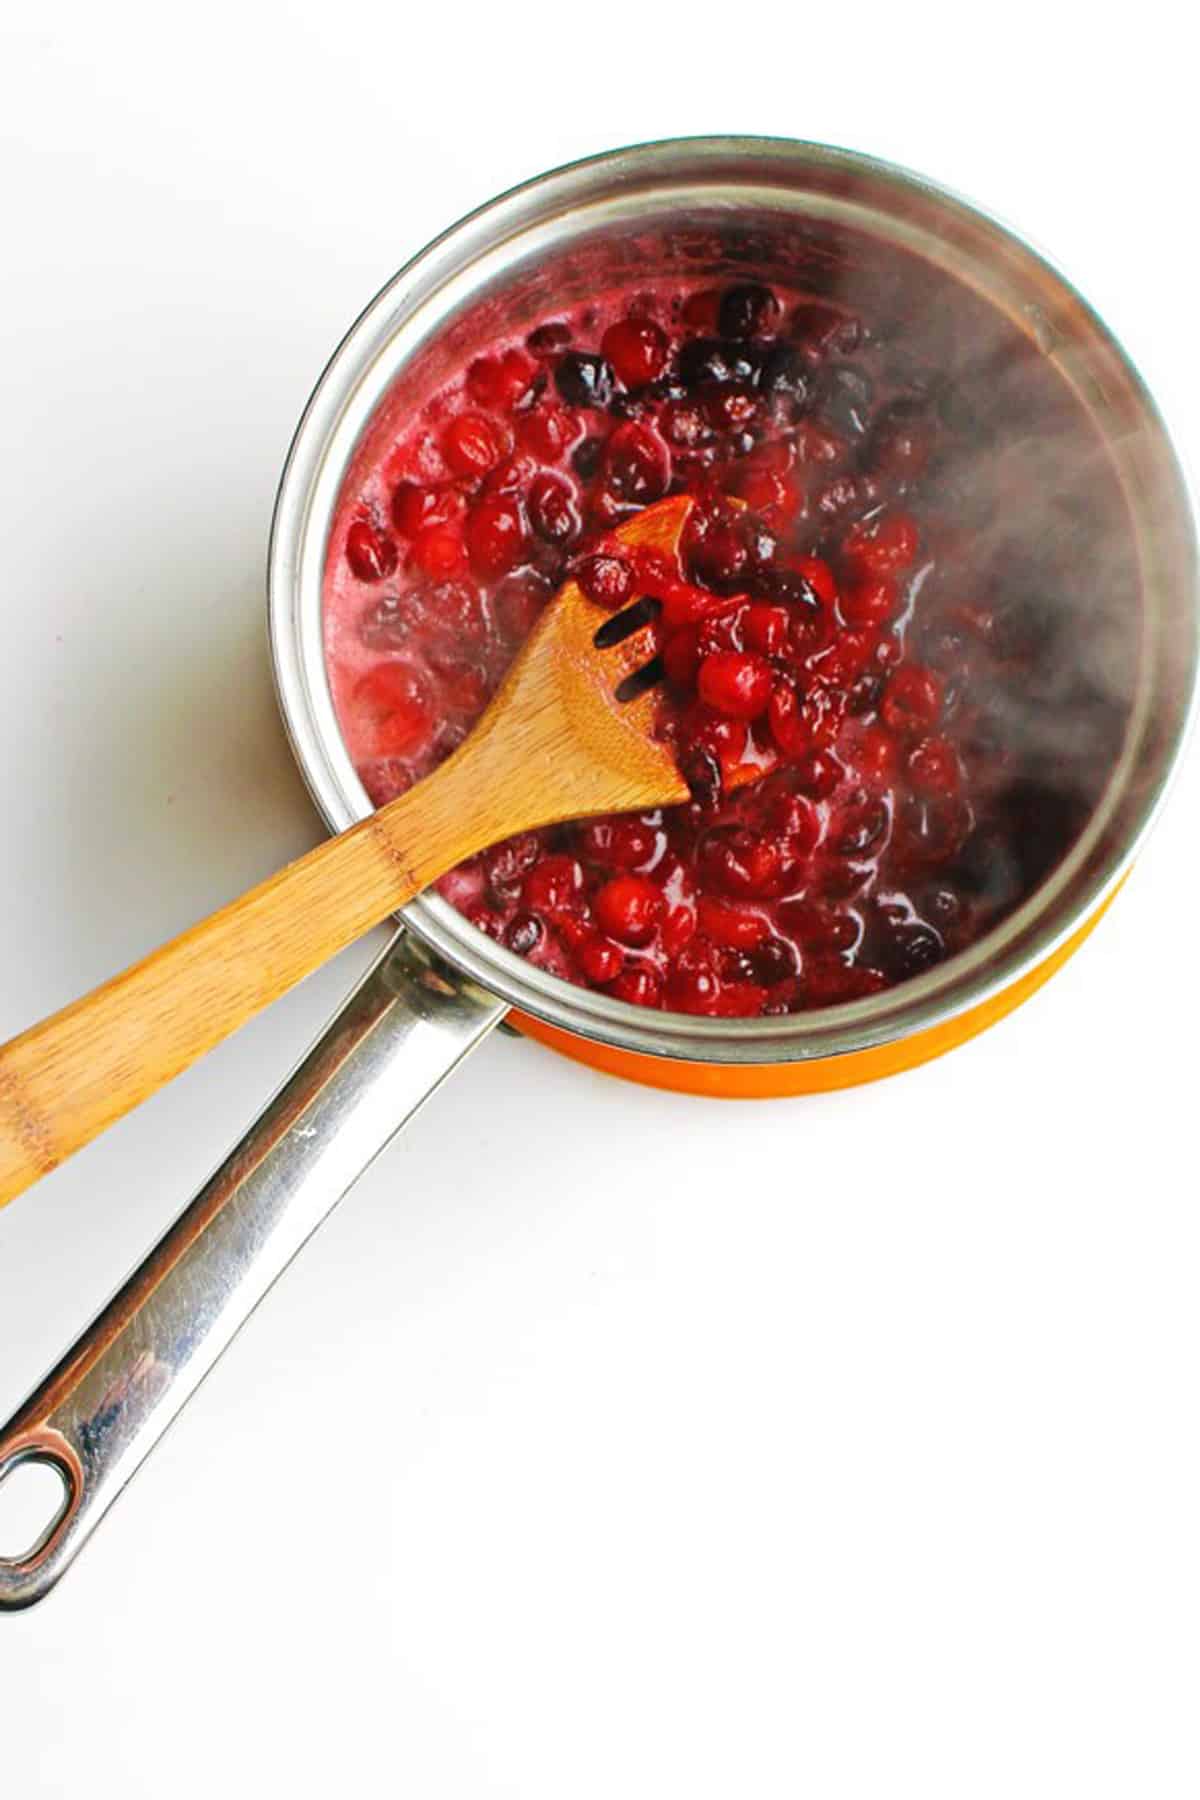 A photo of cranberries cooking in a sauce pan.